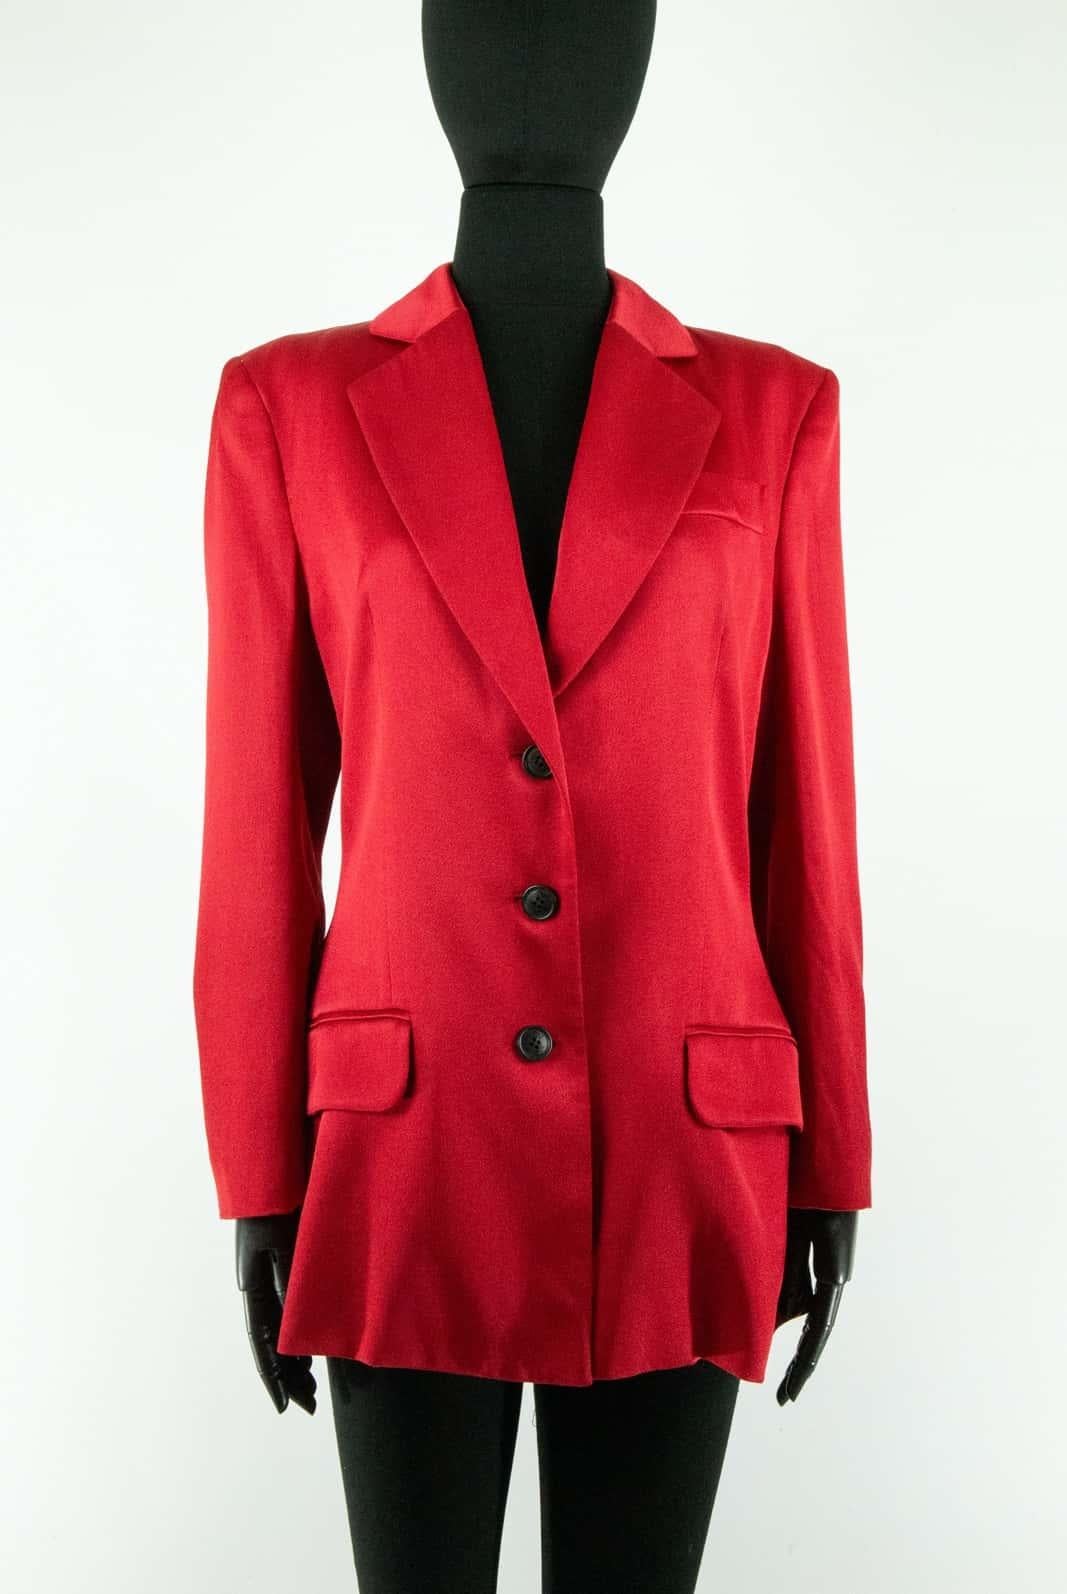 A red satin John Galliano A/W 2001 single-breasted blazer with black buttons embossed with the ‘John Galliano’ house logo up the front and on the cuff. At the front of the blazer are two covered pockets and one at the breast under the lapel. The cut